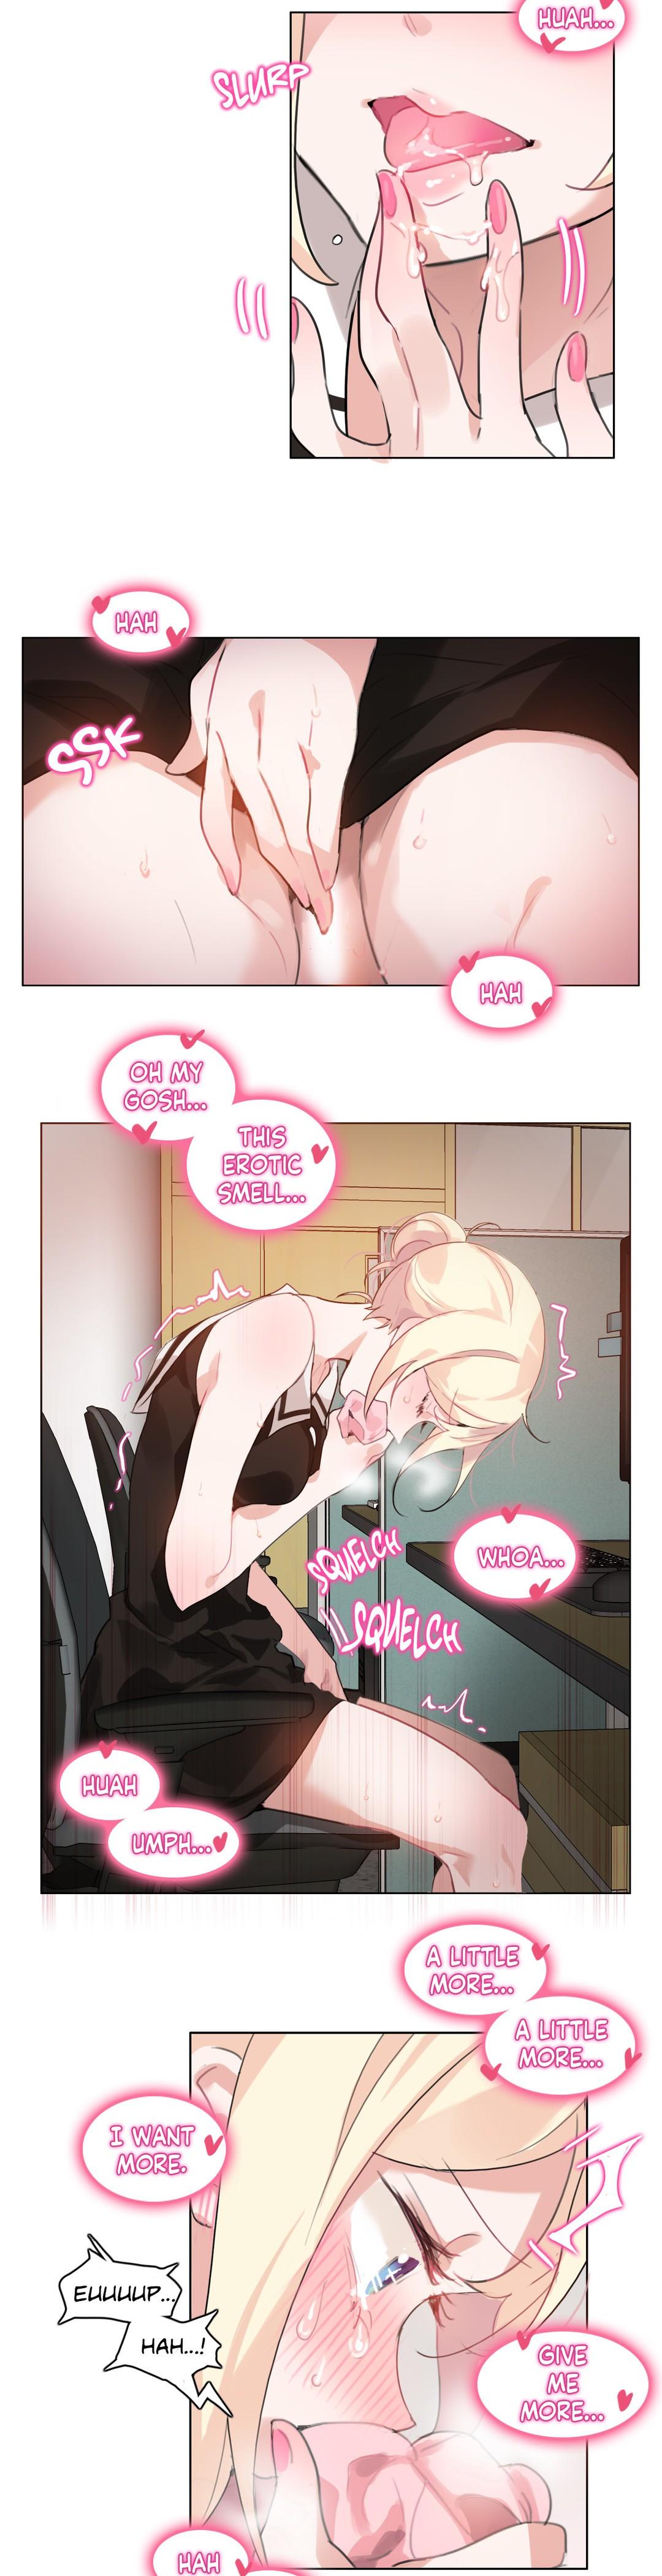 A Pervert's Daily Life Ch. 1-34 285